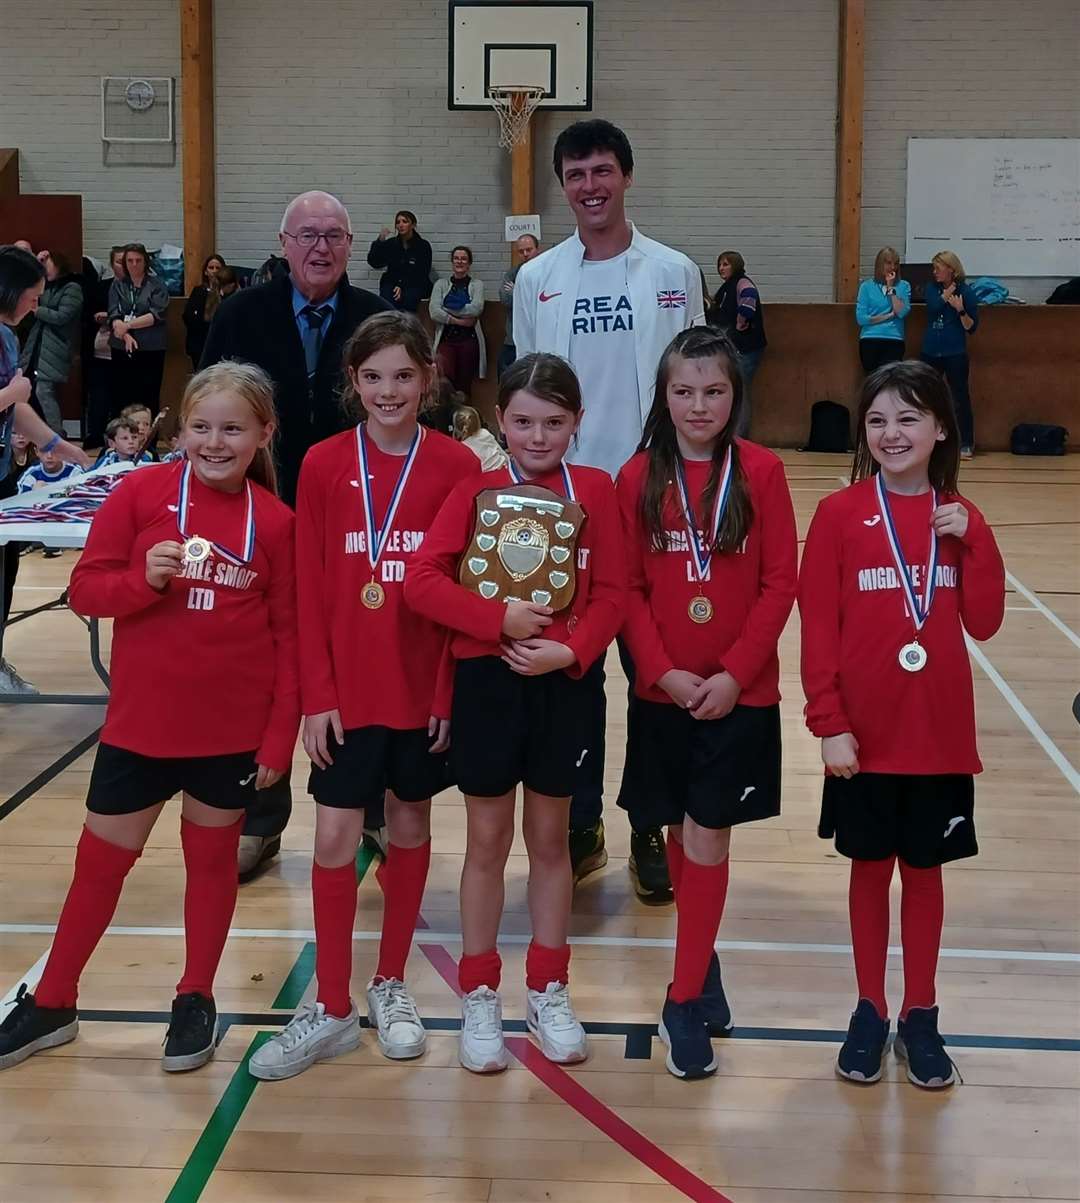 A team from Lairg won the Small Schools girls' category.